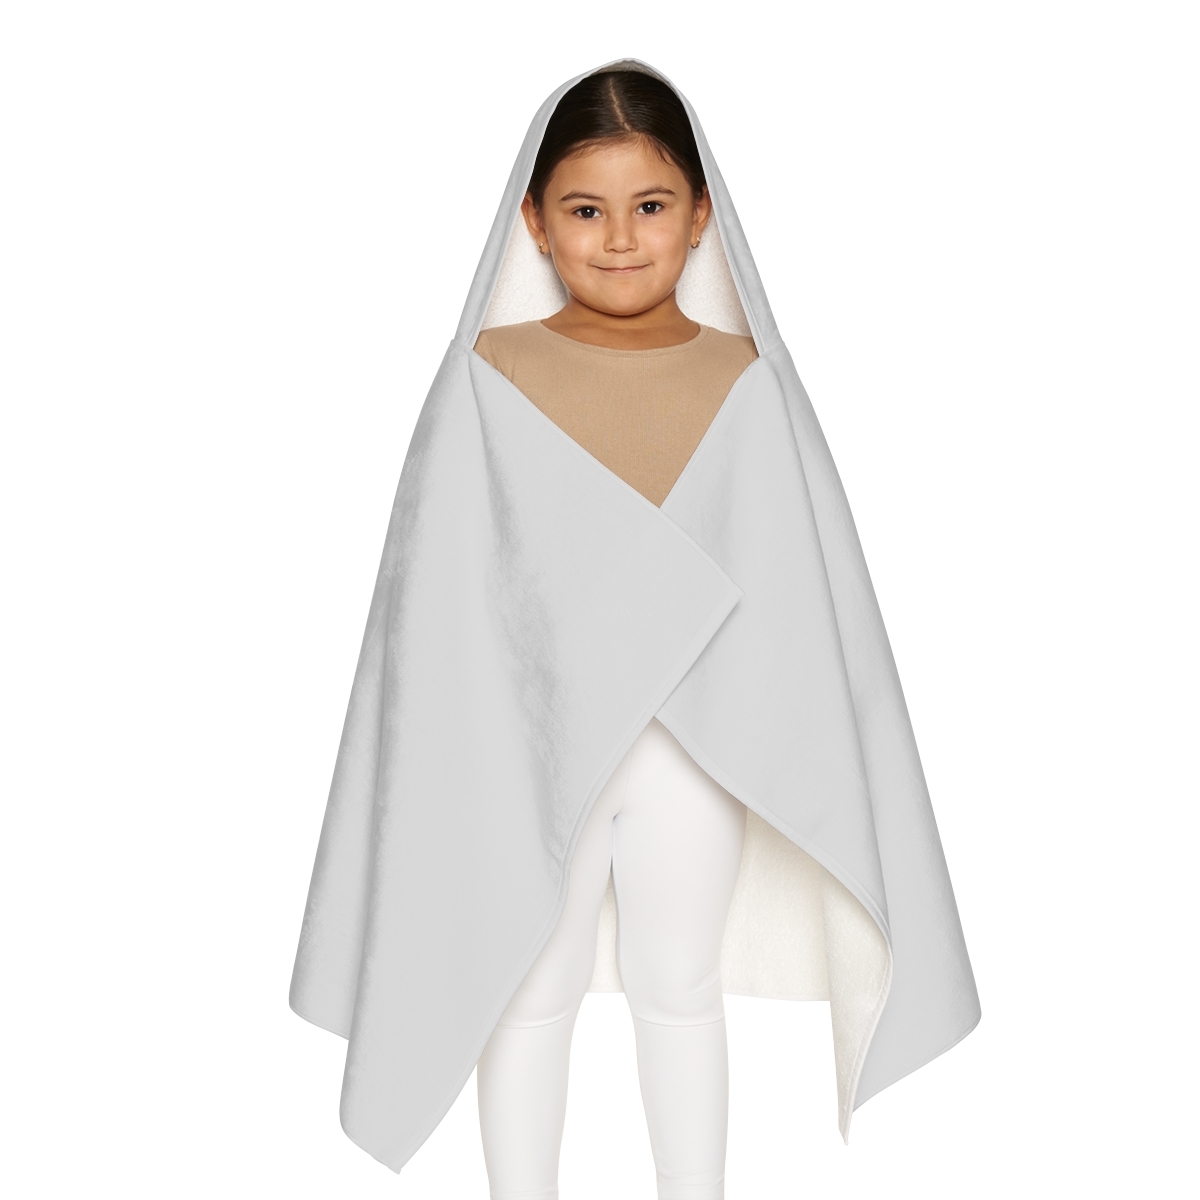 Primary image for Cozy Kids' Hooded Towel: "Back That Thing Up" Adventure Vibes